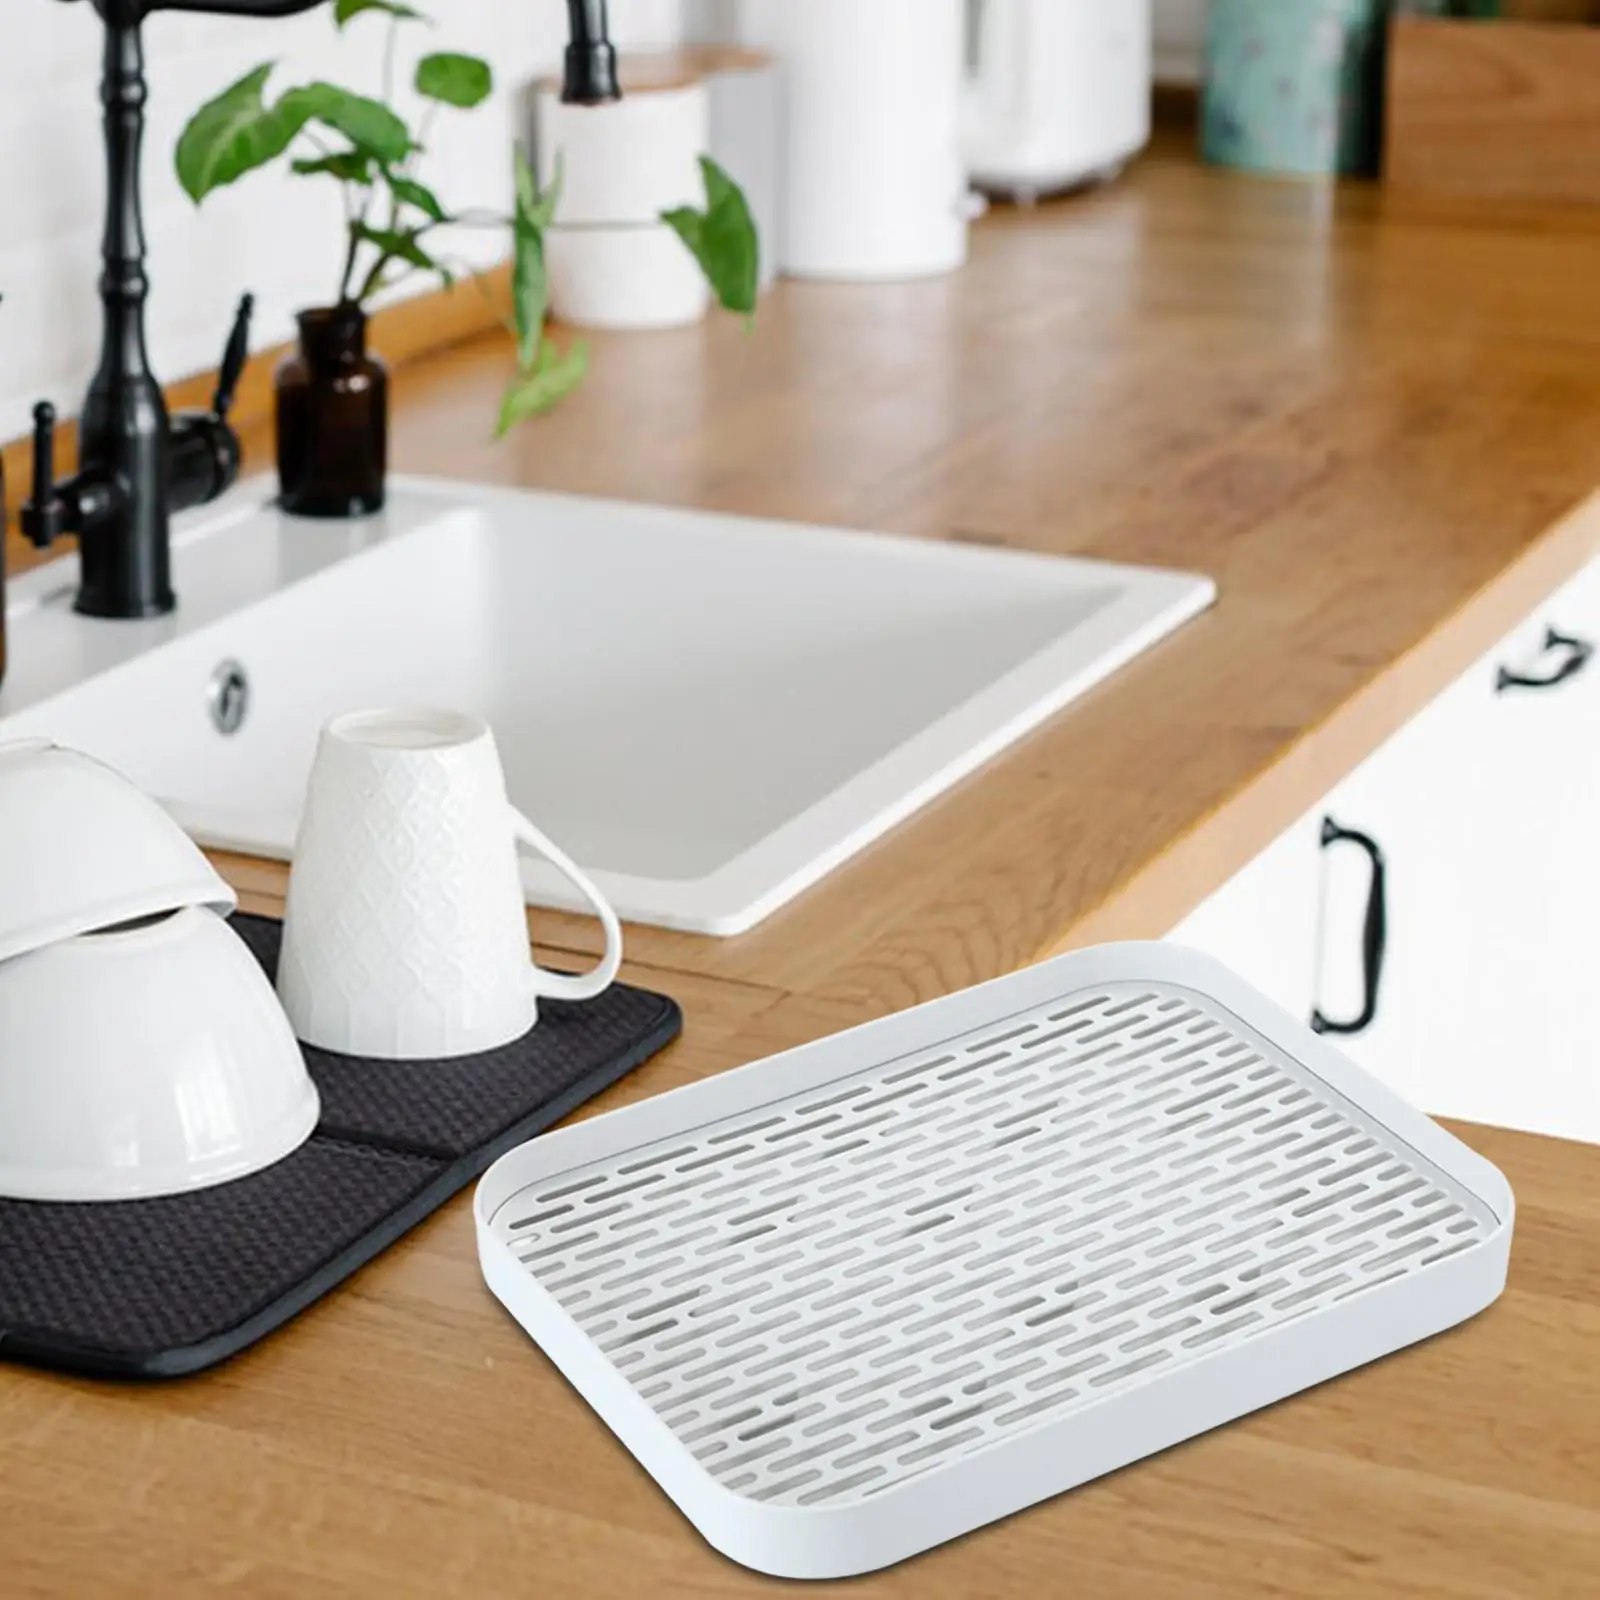 Drainer with Drip Tray Small Dish Drain Board Mat Drainboard Serving Storage Tray for Cup